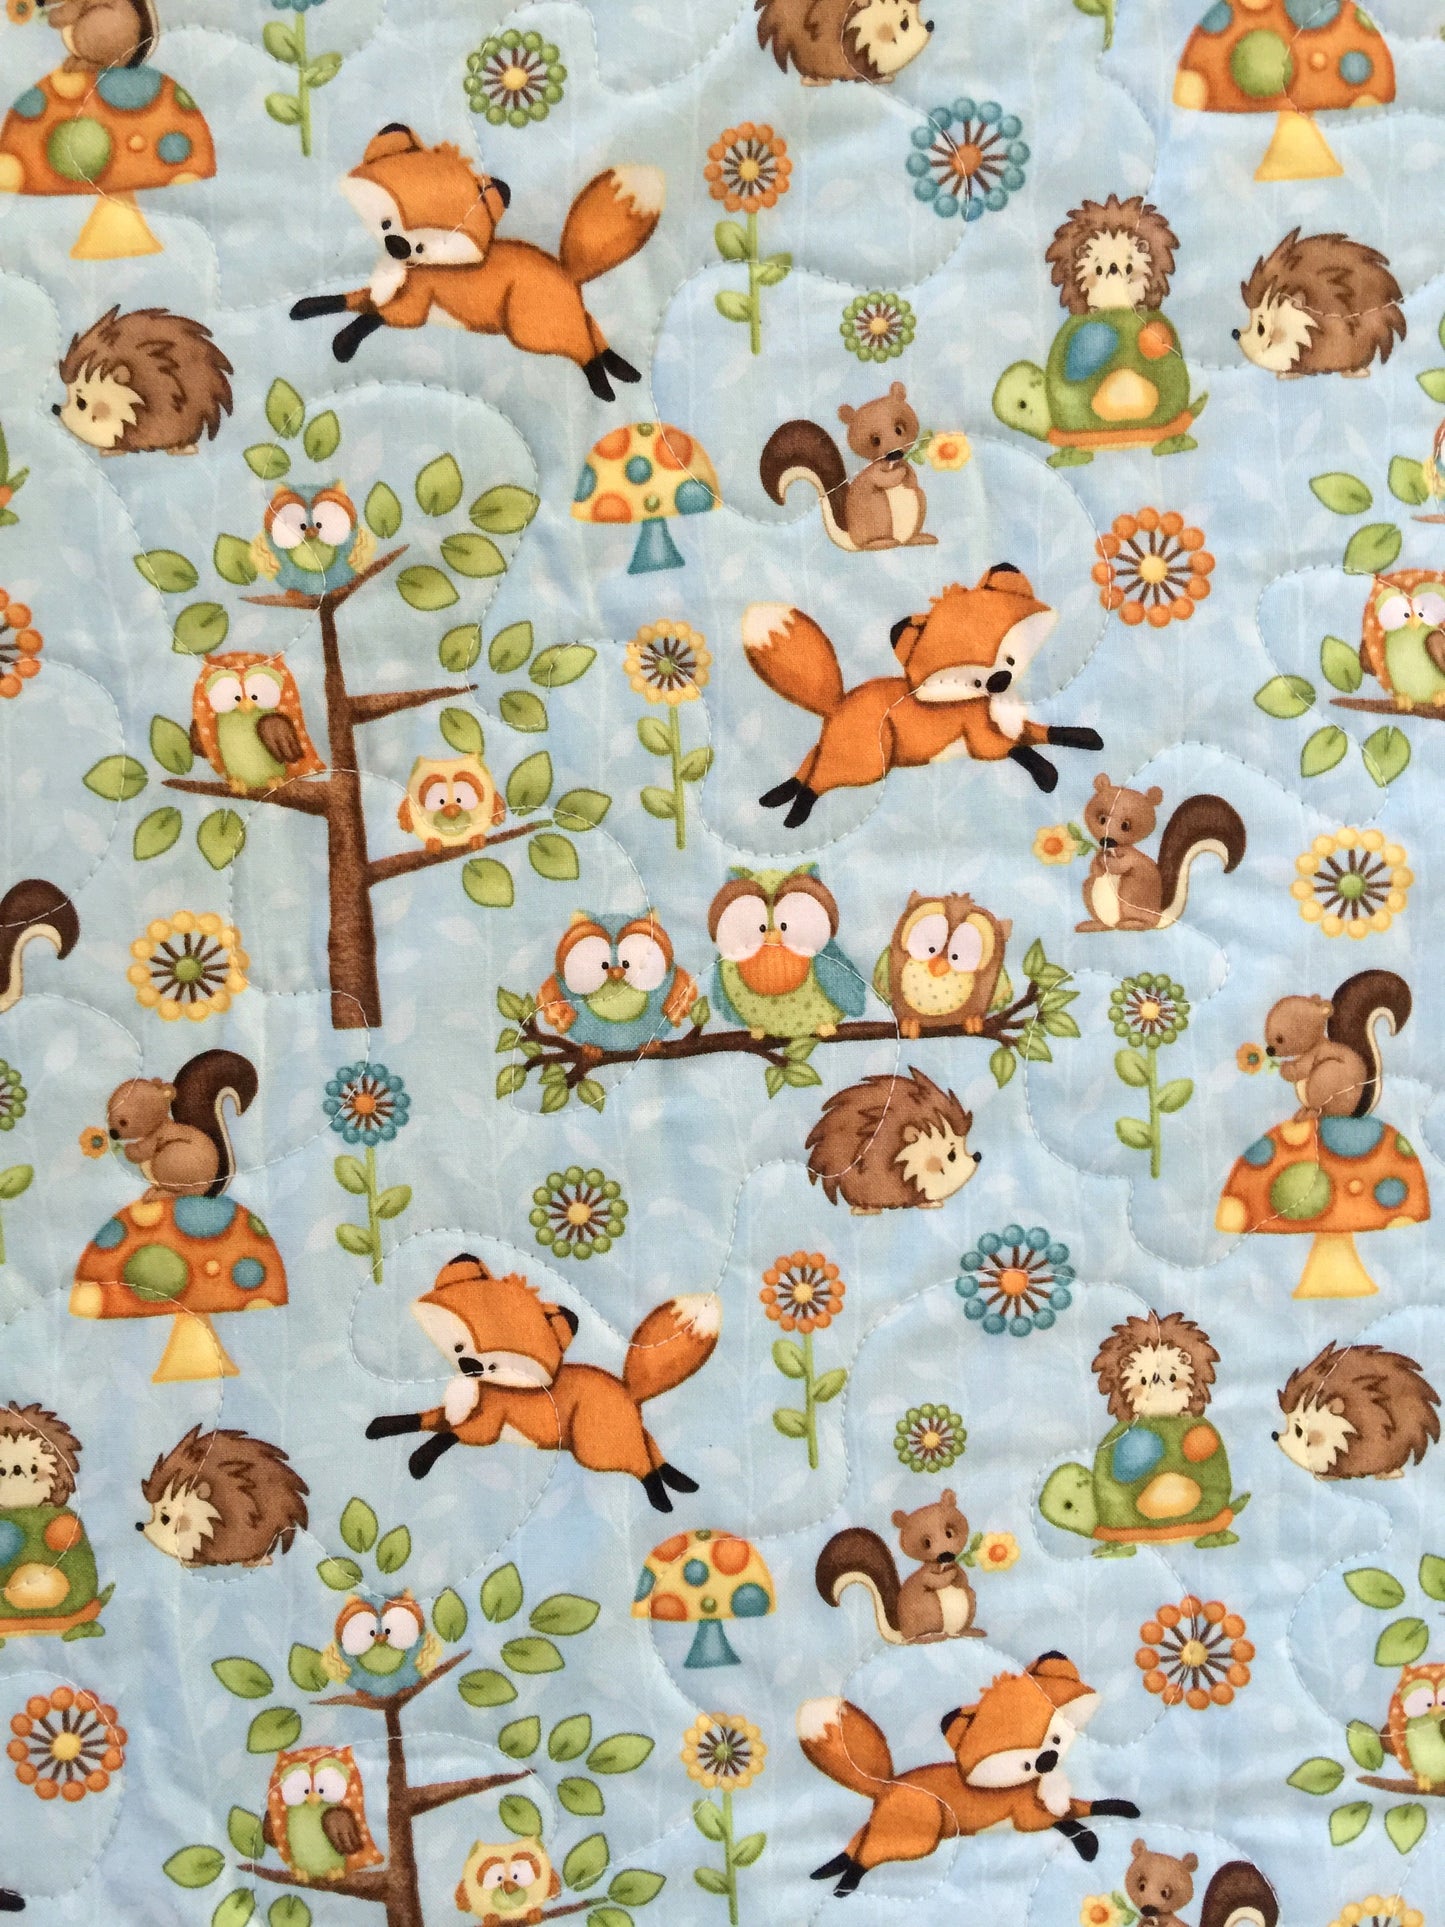 NATURE OWLS FOX SQUIRRELS PORCUPINES Green, Orange Quilted Blanket Nursery Child Toddler Bedding to Adult Lap Blanket